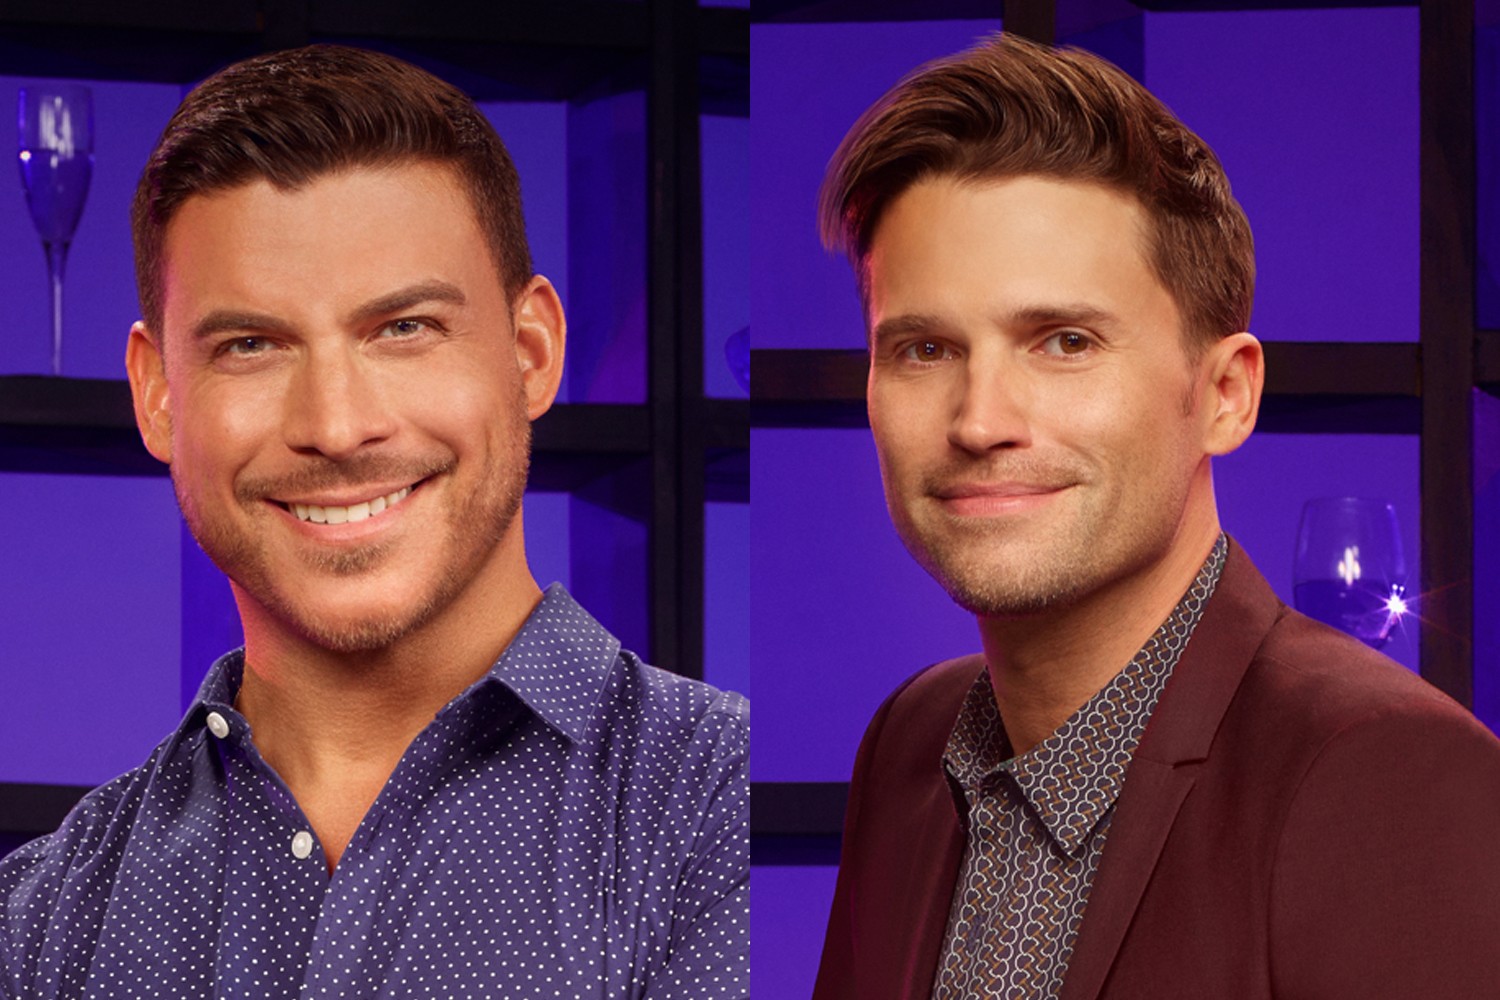 ‘Vanderpump Rules’: Tom Schwartz and Cast ‘Blindsided’ by Jax Taylor Exit, Source Says